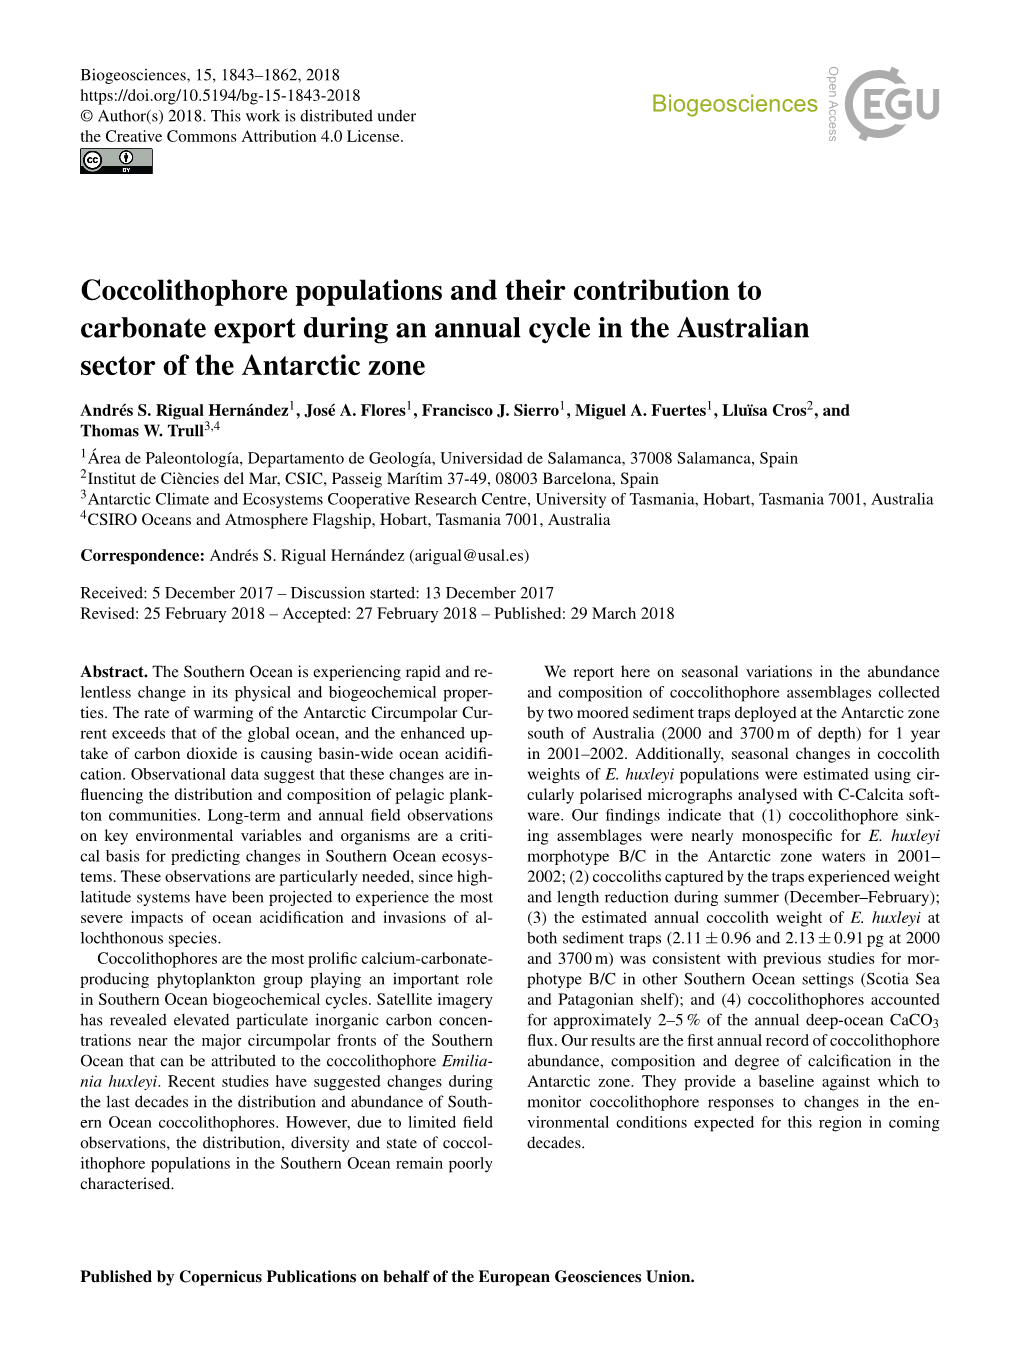 Coccolithophore Populations and Their Contribution to Carbonate Export During an Annual Cycle in the Australian Sector of the Antarctic Zone